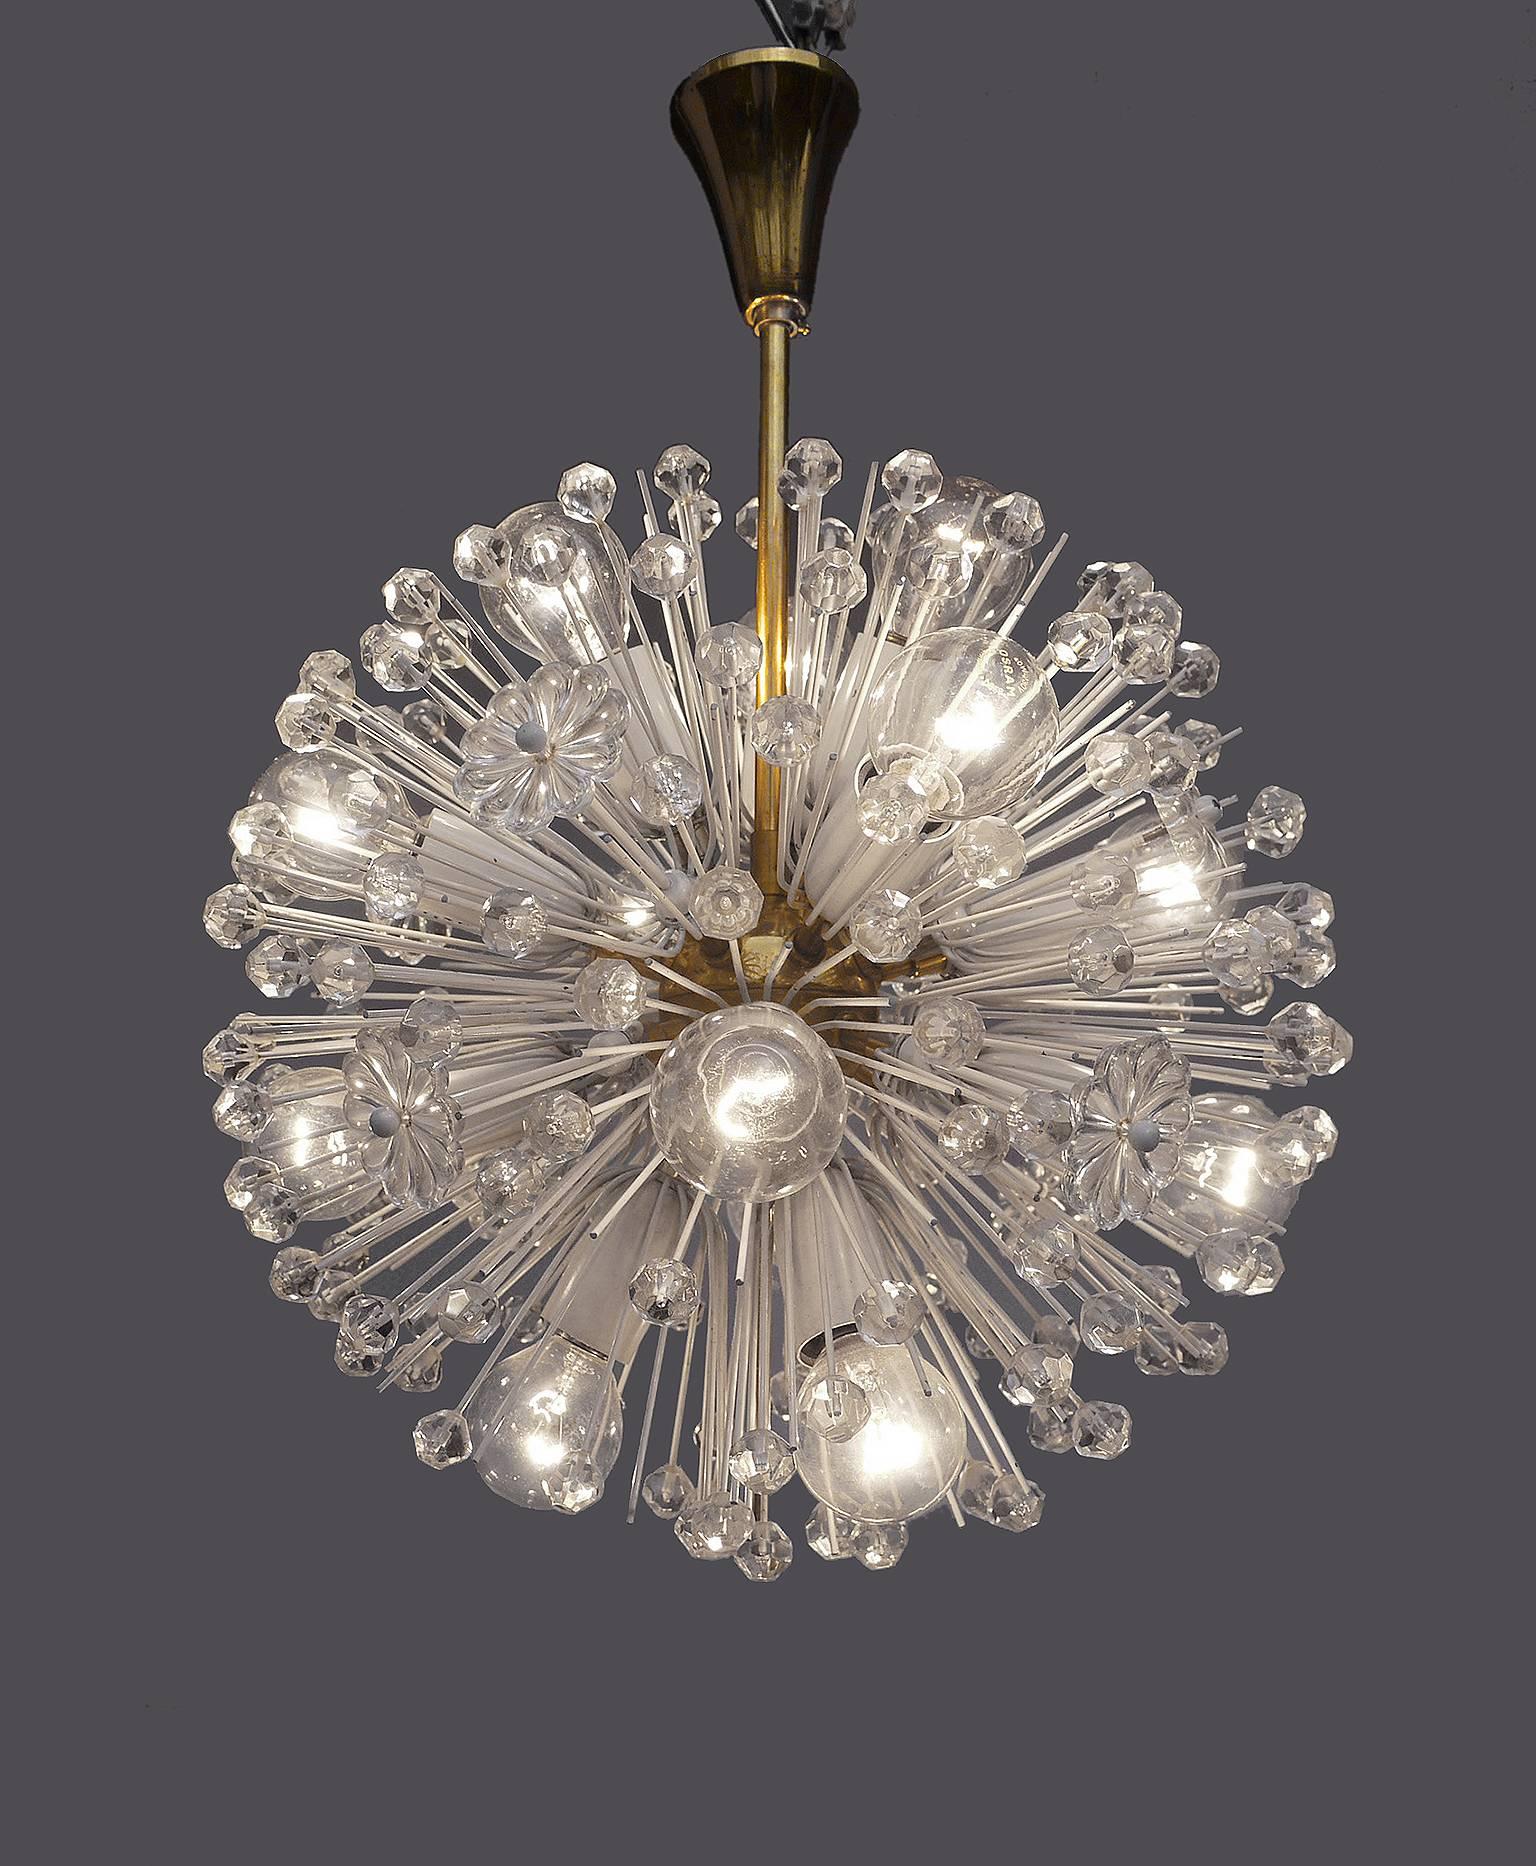 A smaller version of the snowball chandelier by Emil Stejnar for Rupert Nikoll made in Vienna, Austria in the 1950s.
 